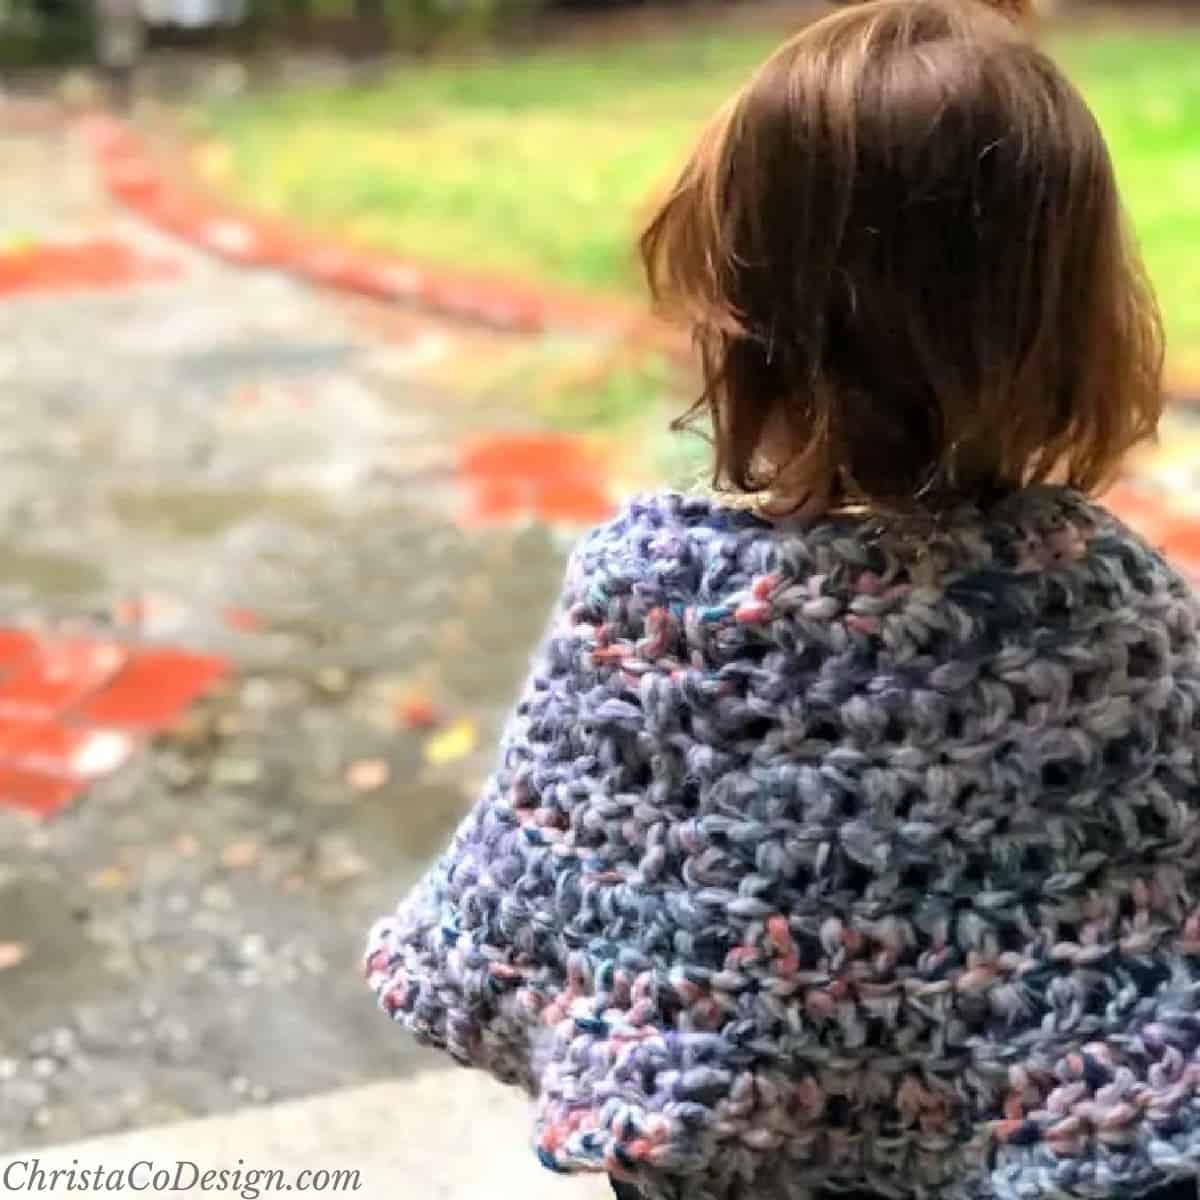 Toddler with colorful poncho looking out from front porch.